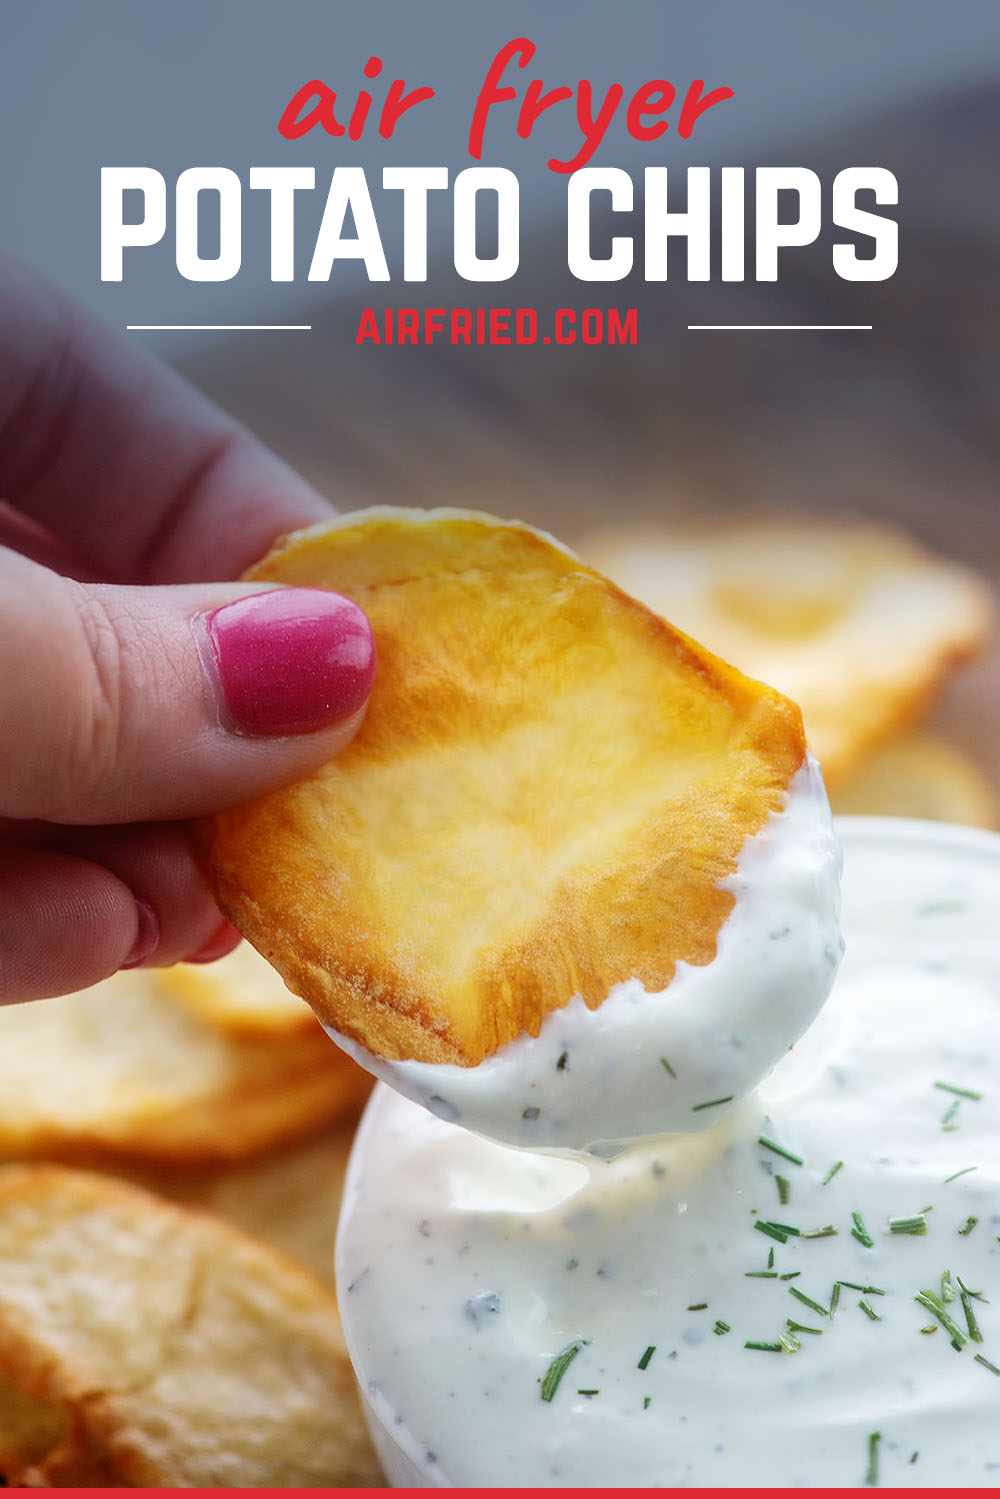 Grab your favorite dip because these crispy air fryer potato chips are ready to be devoured!